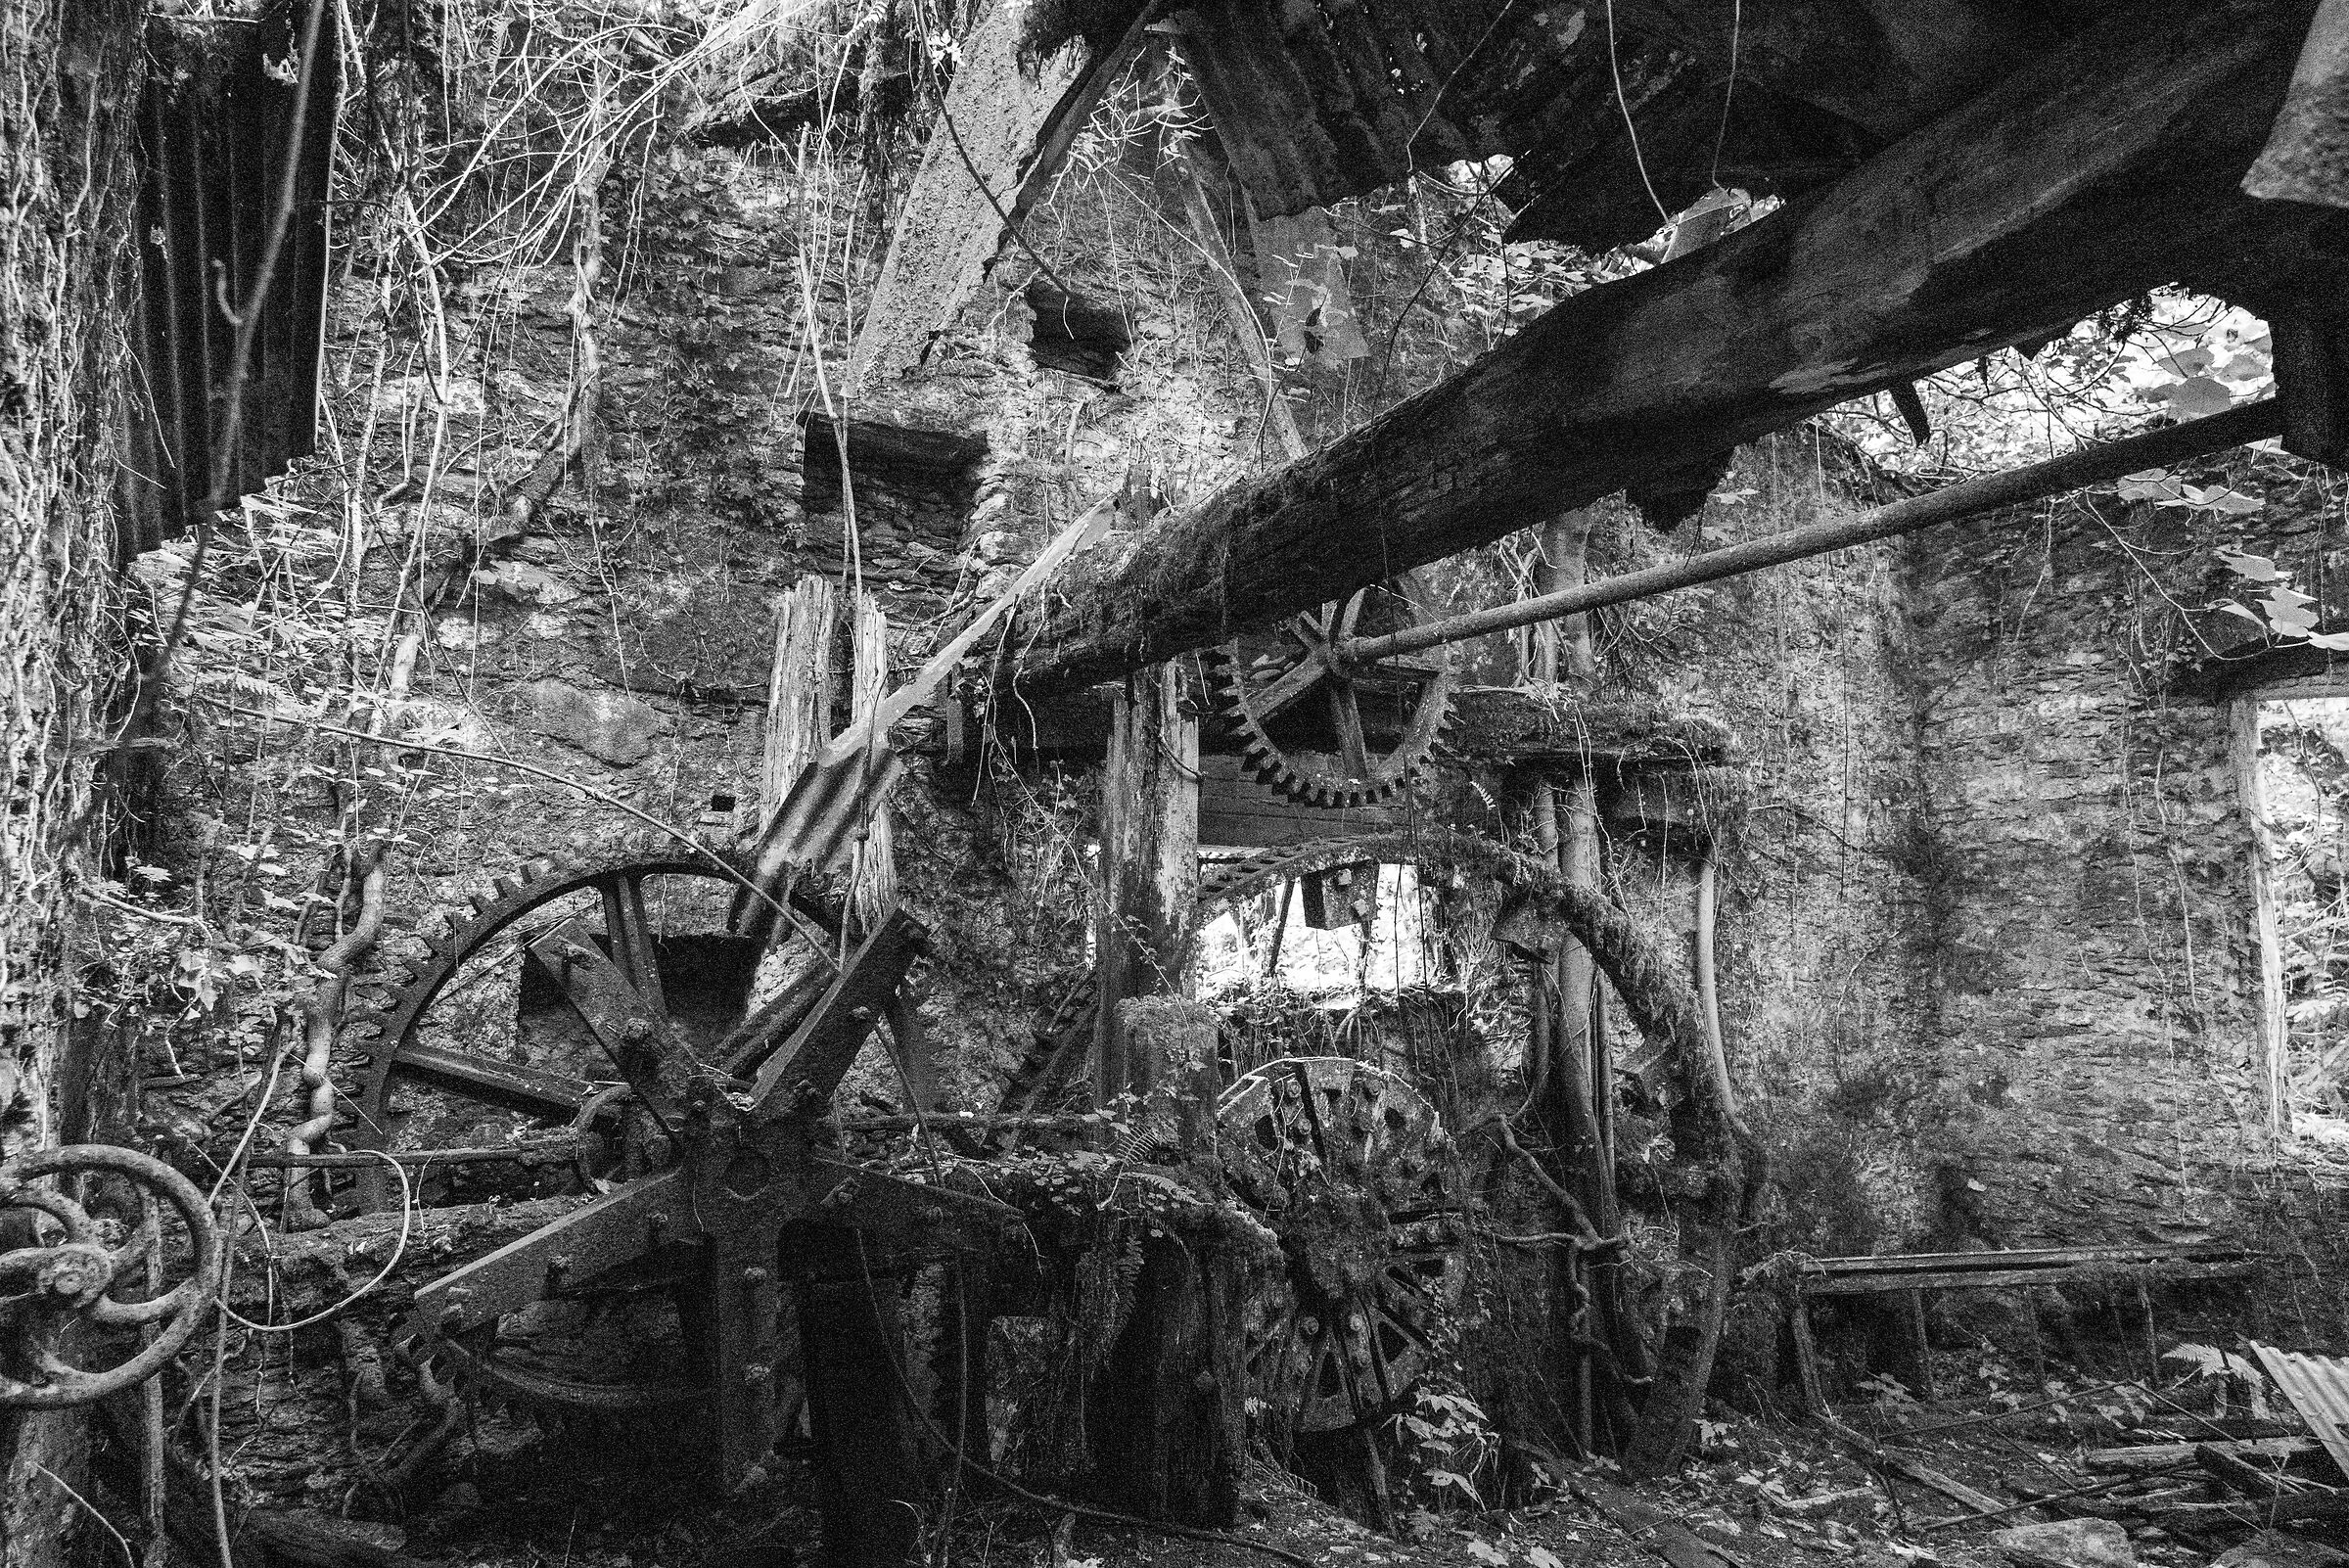 The machines of the old abandoned mine...